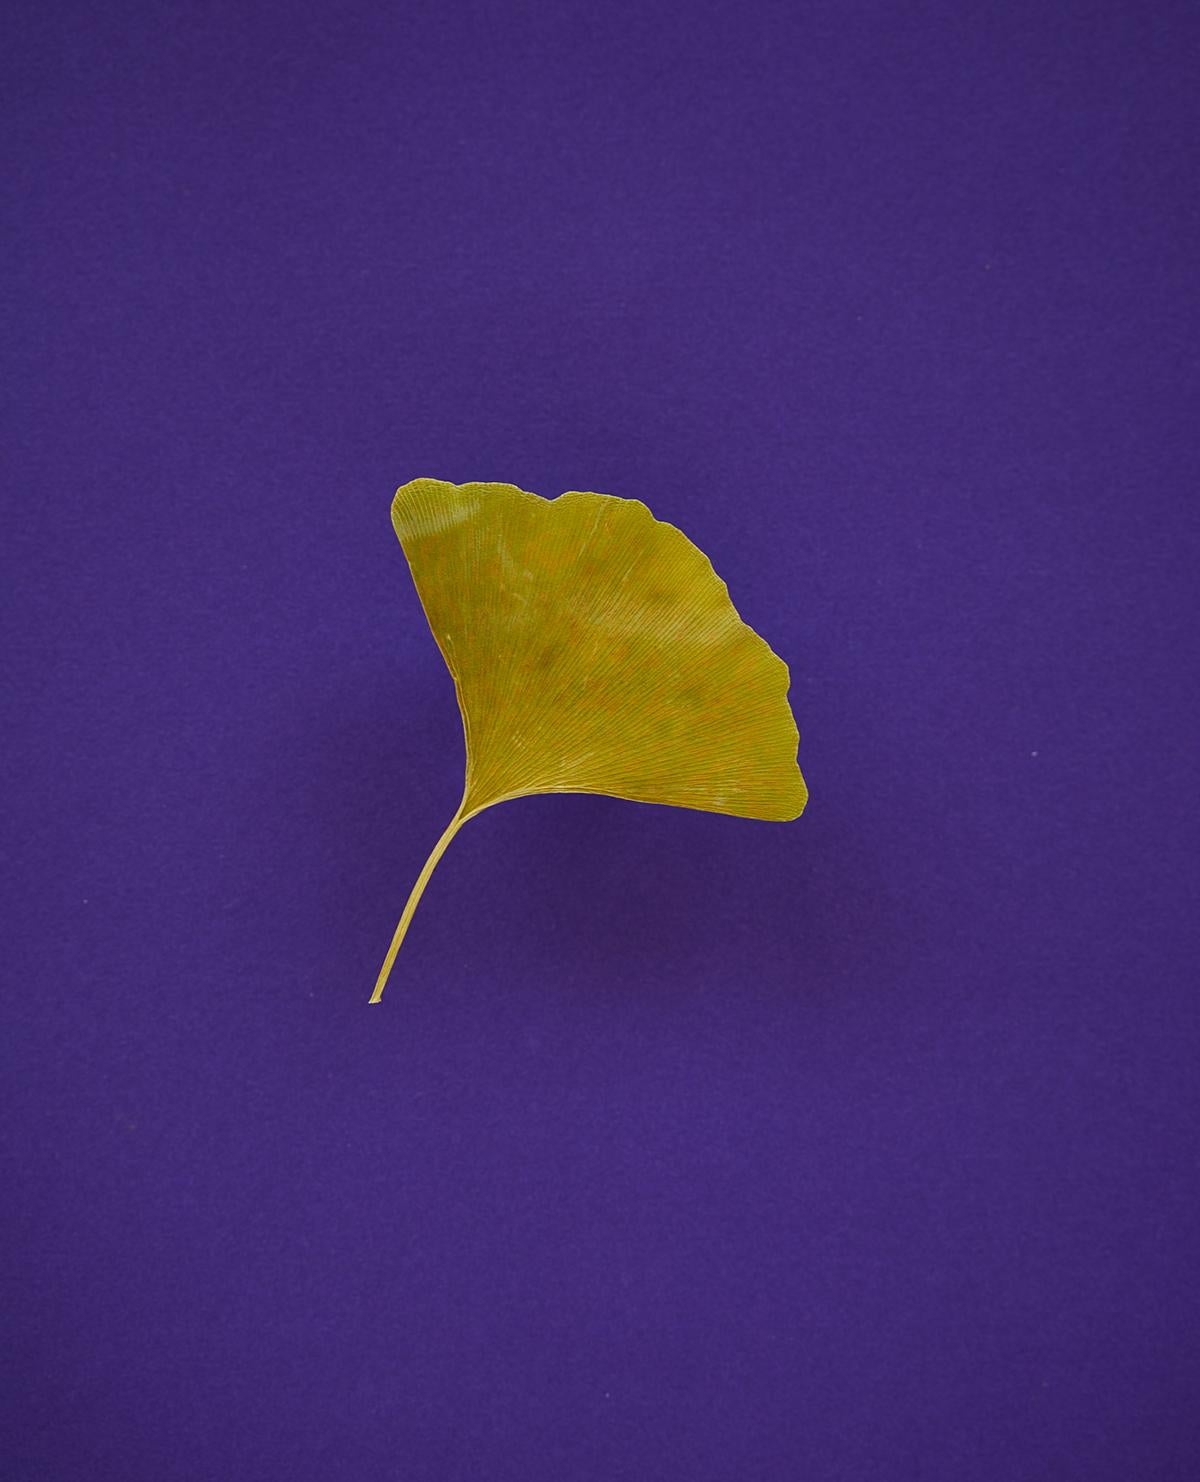 Caren Alpert photograph of a dried ginkgo leaf on a deep purple background. “Ginkgo (dried)” is printed on archival, full color photographic paper. This size is 11” x 14”. Available in three sizes (unframed): 11” x 14”, 16” x 20�”, 24” x 36”. Custom